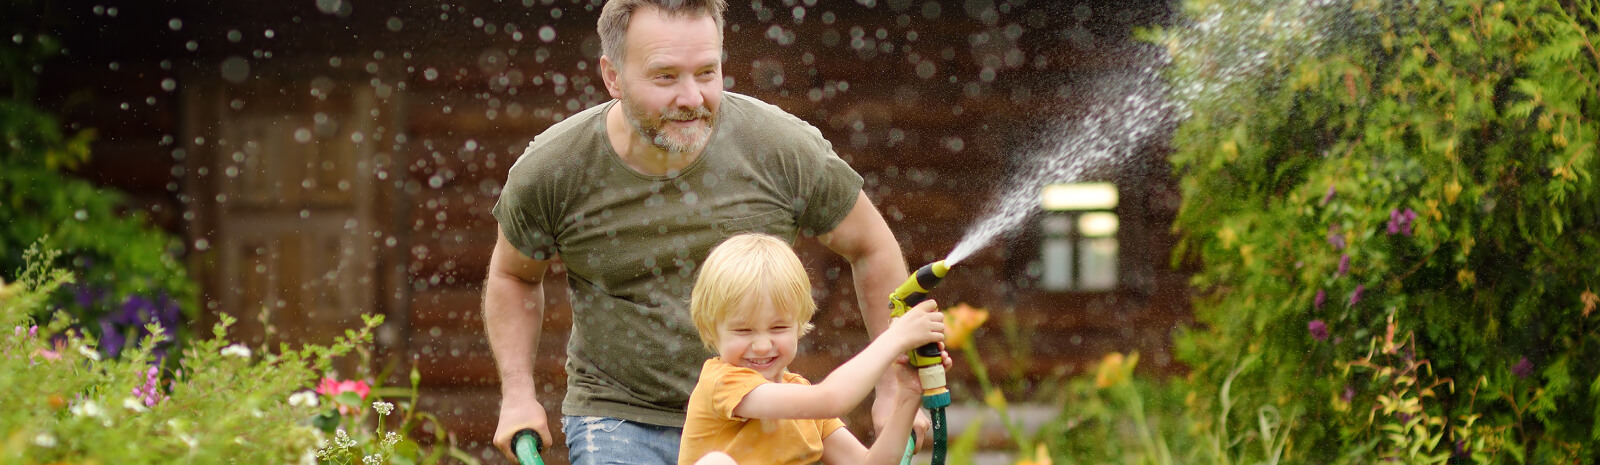 Dad pushing young kid in a wheelbarrow while holding a water hose